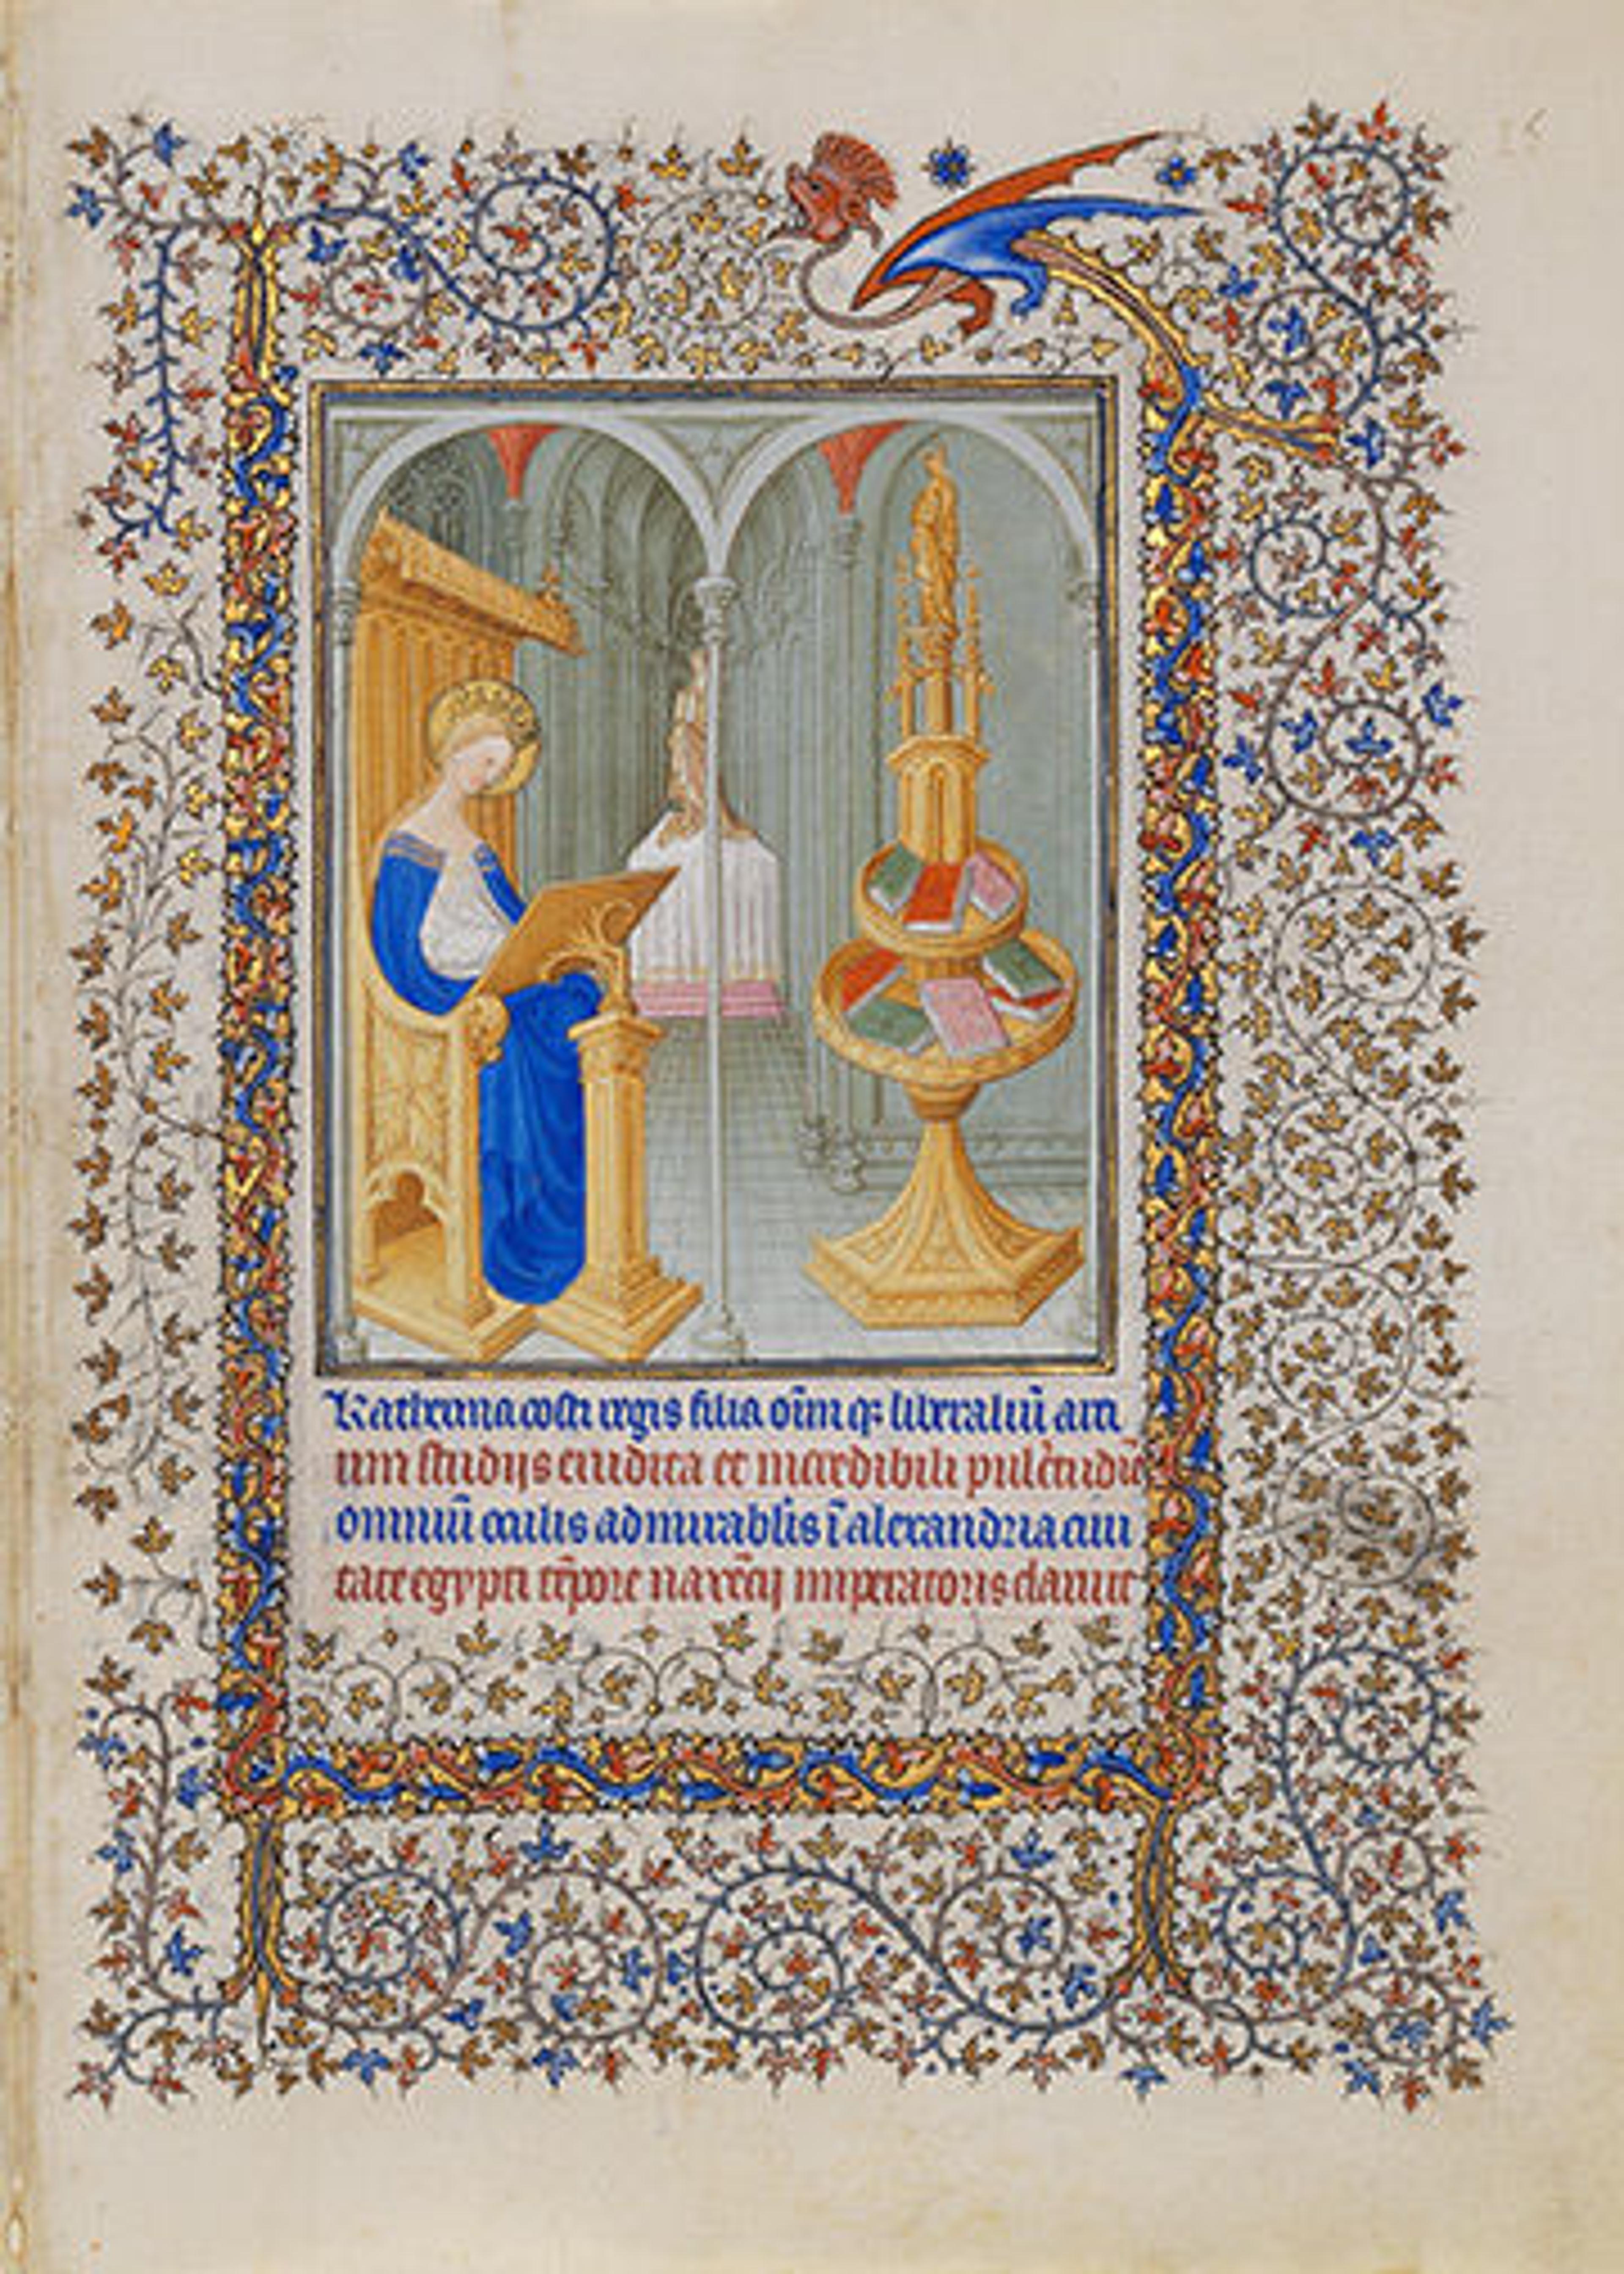 A page from a Book of Hours, depicting Saint Catherine